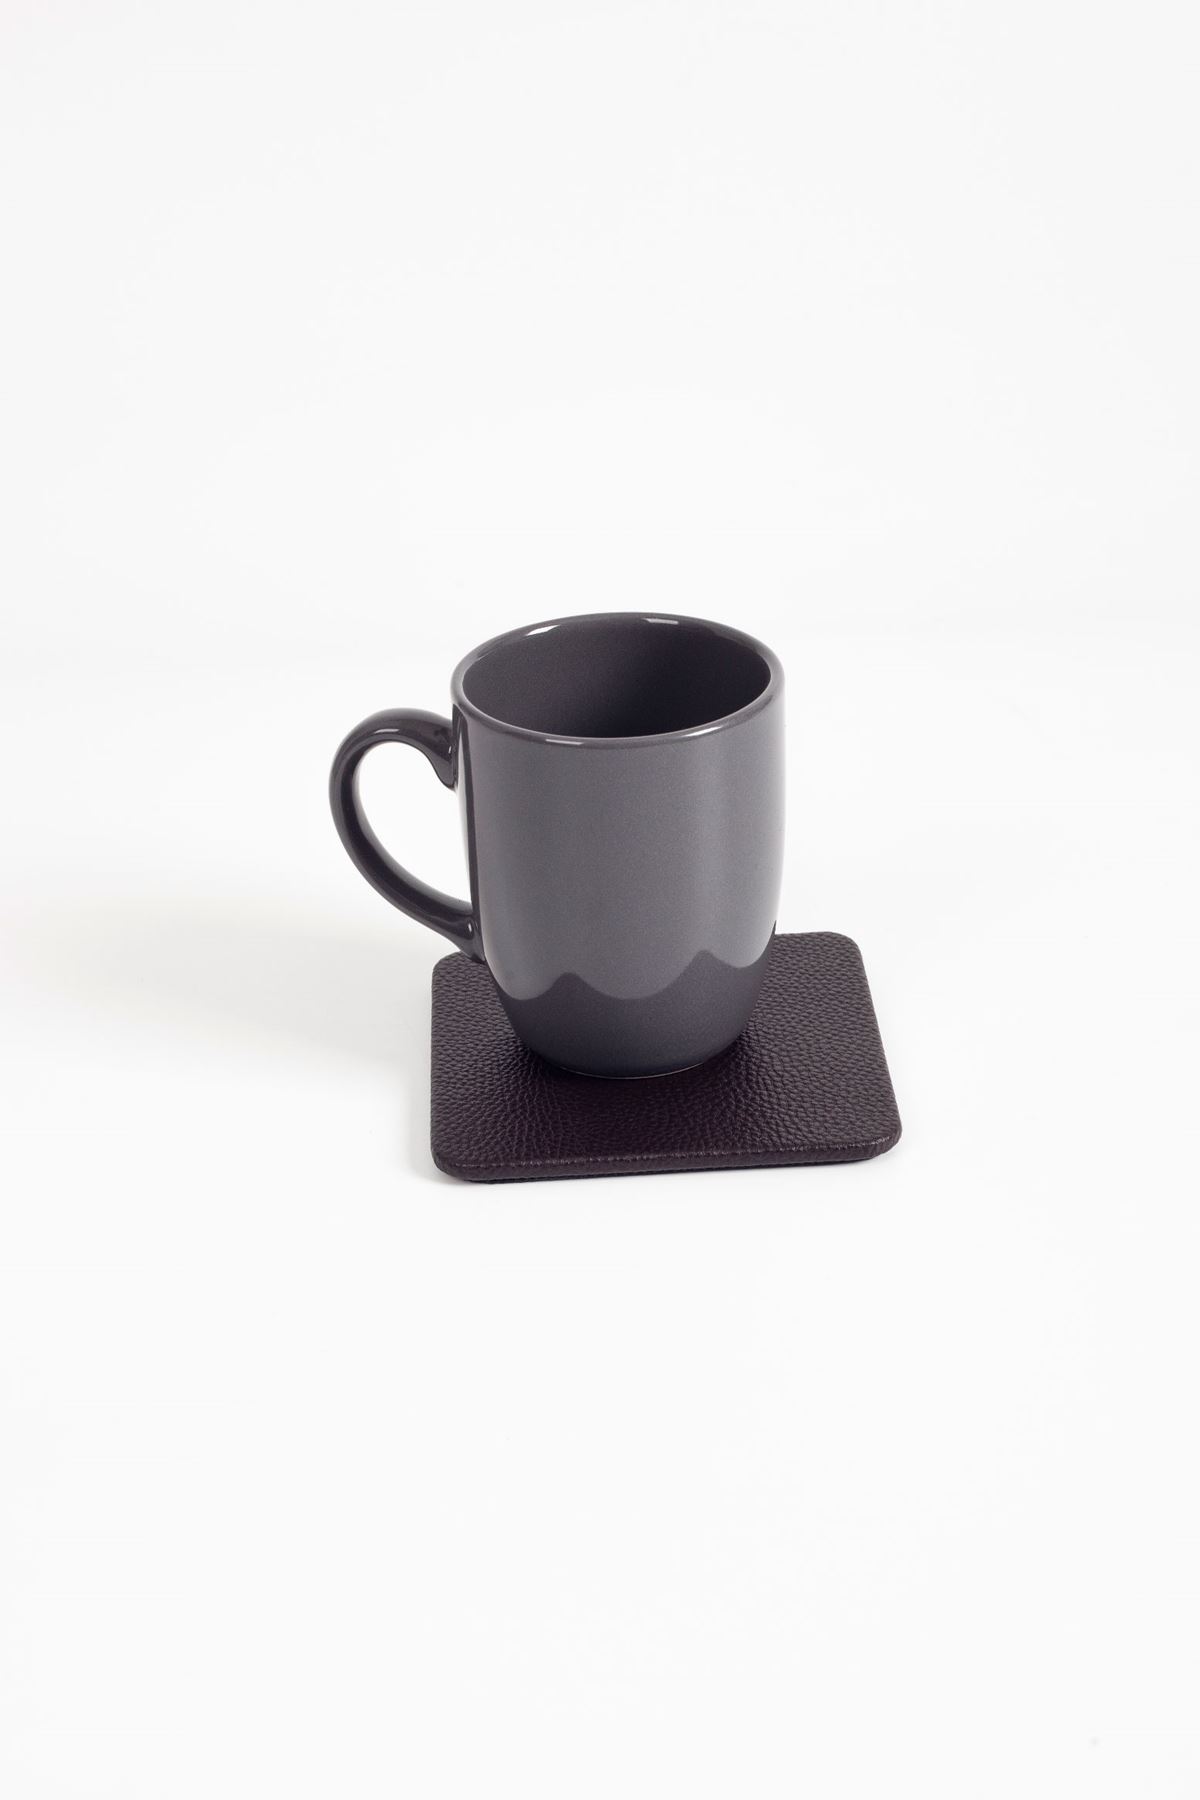 Brown Leather Square Coaster 1 Piece